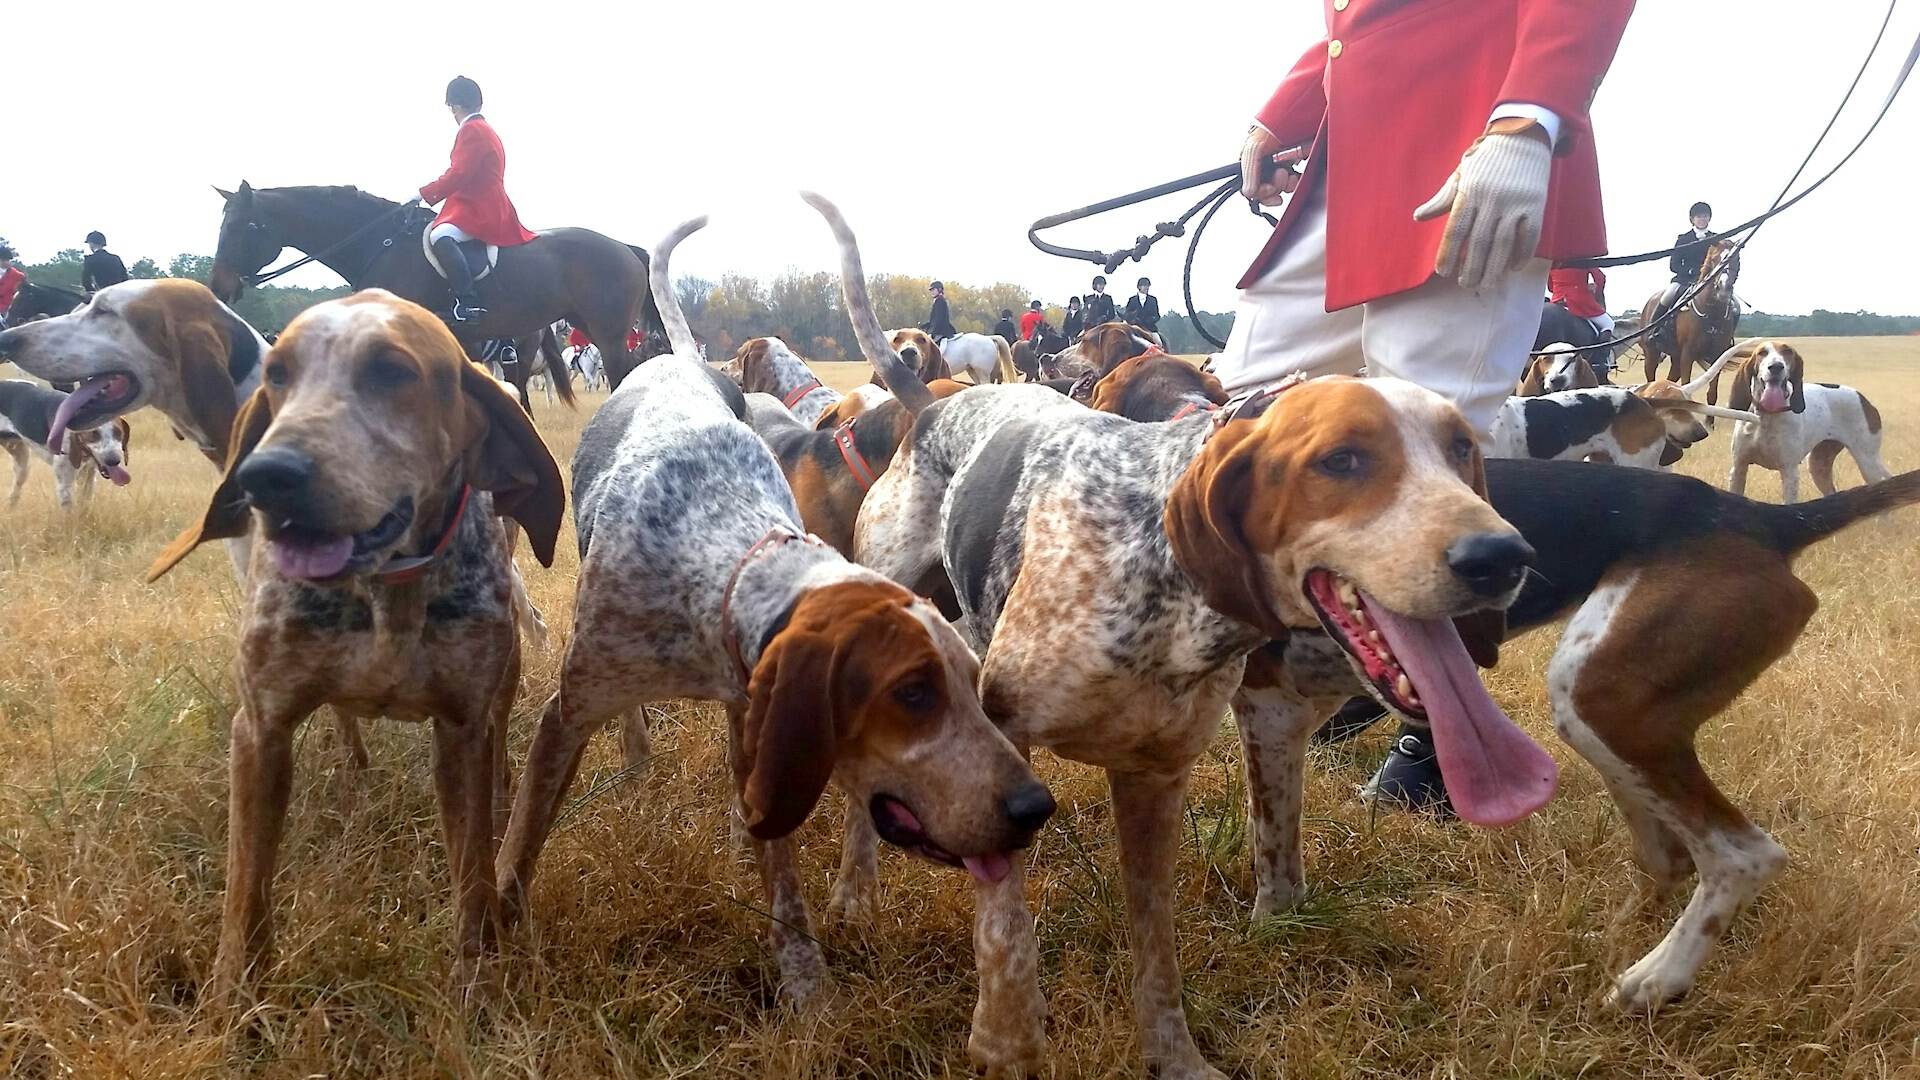 A pack of Beagles playing in an outdoor field